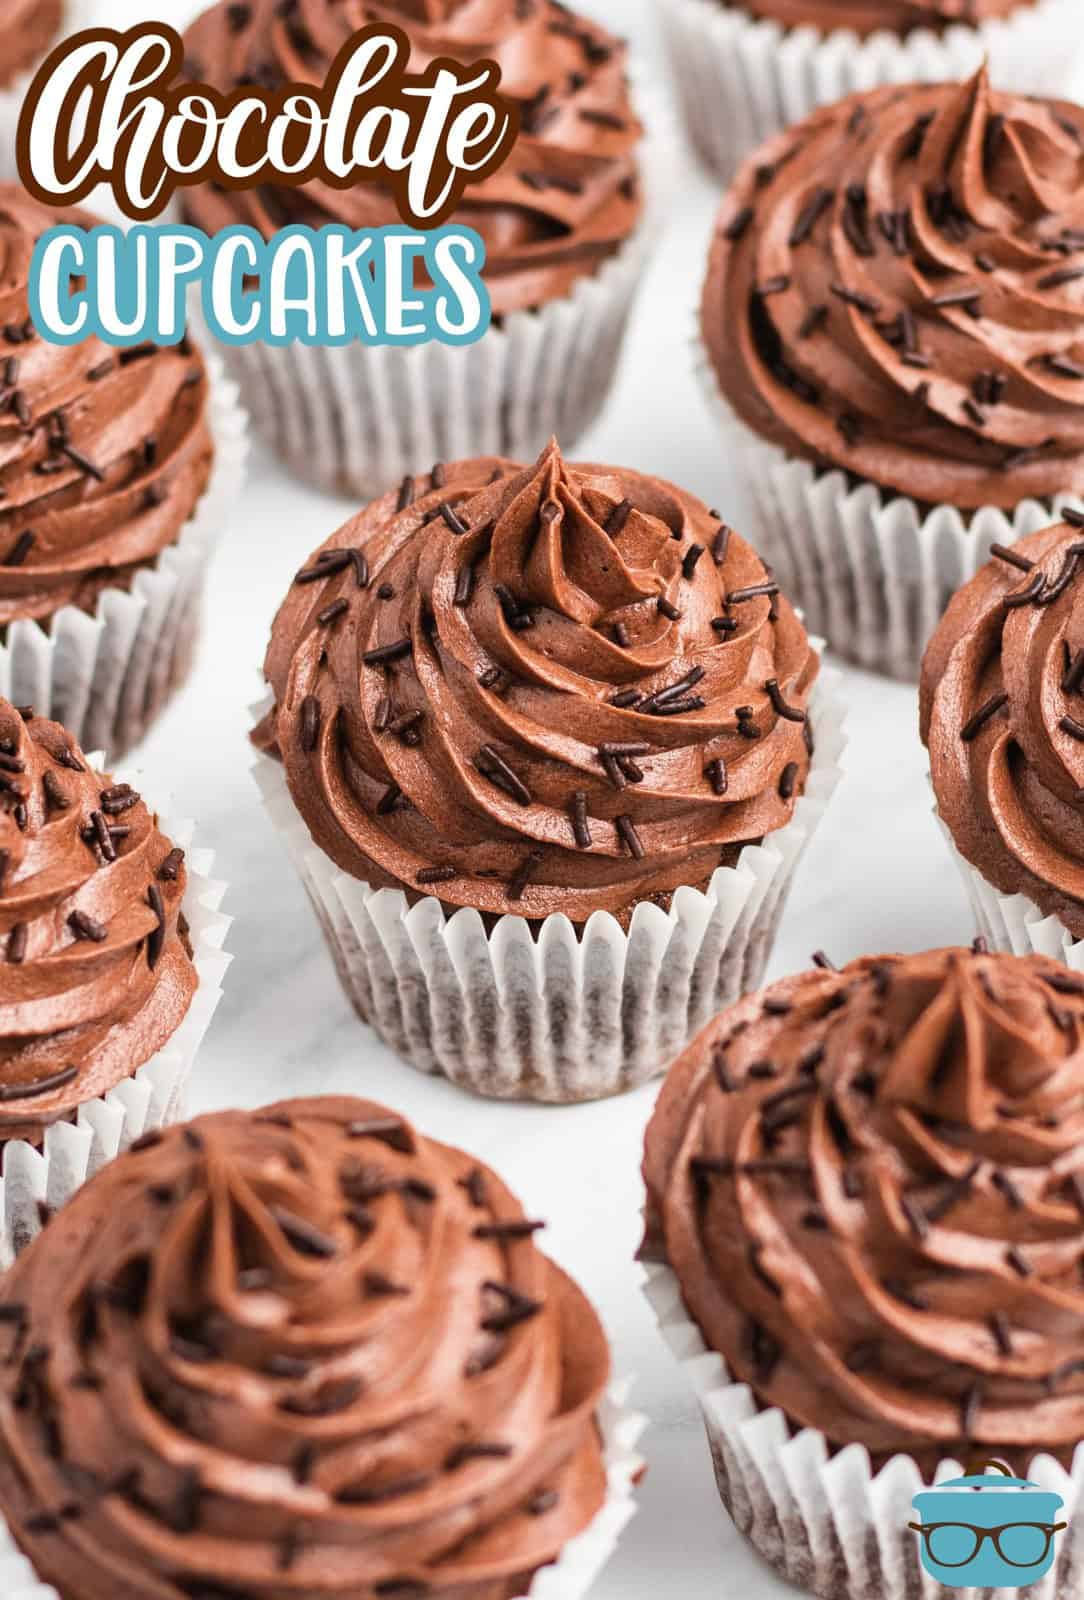 Pinterest image slightly overhead of Easy Chocolate Cupcakes on marble showing sprinkle garnishes.